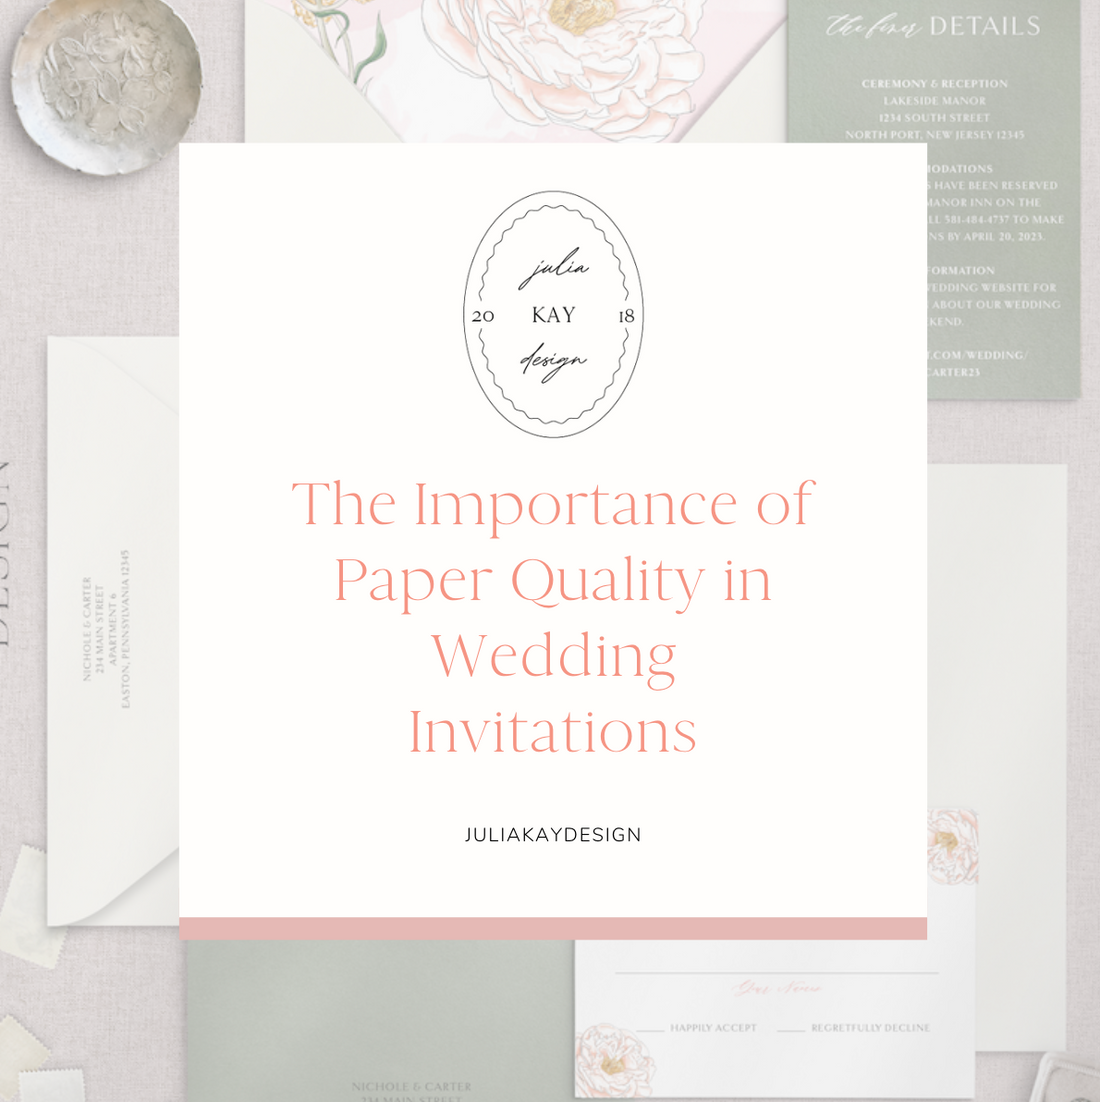 The Importance of Paper Quality in Wedding Invitations